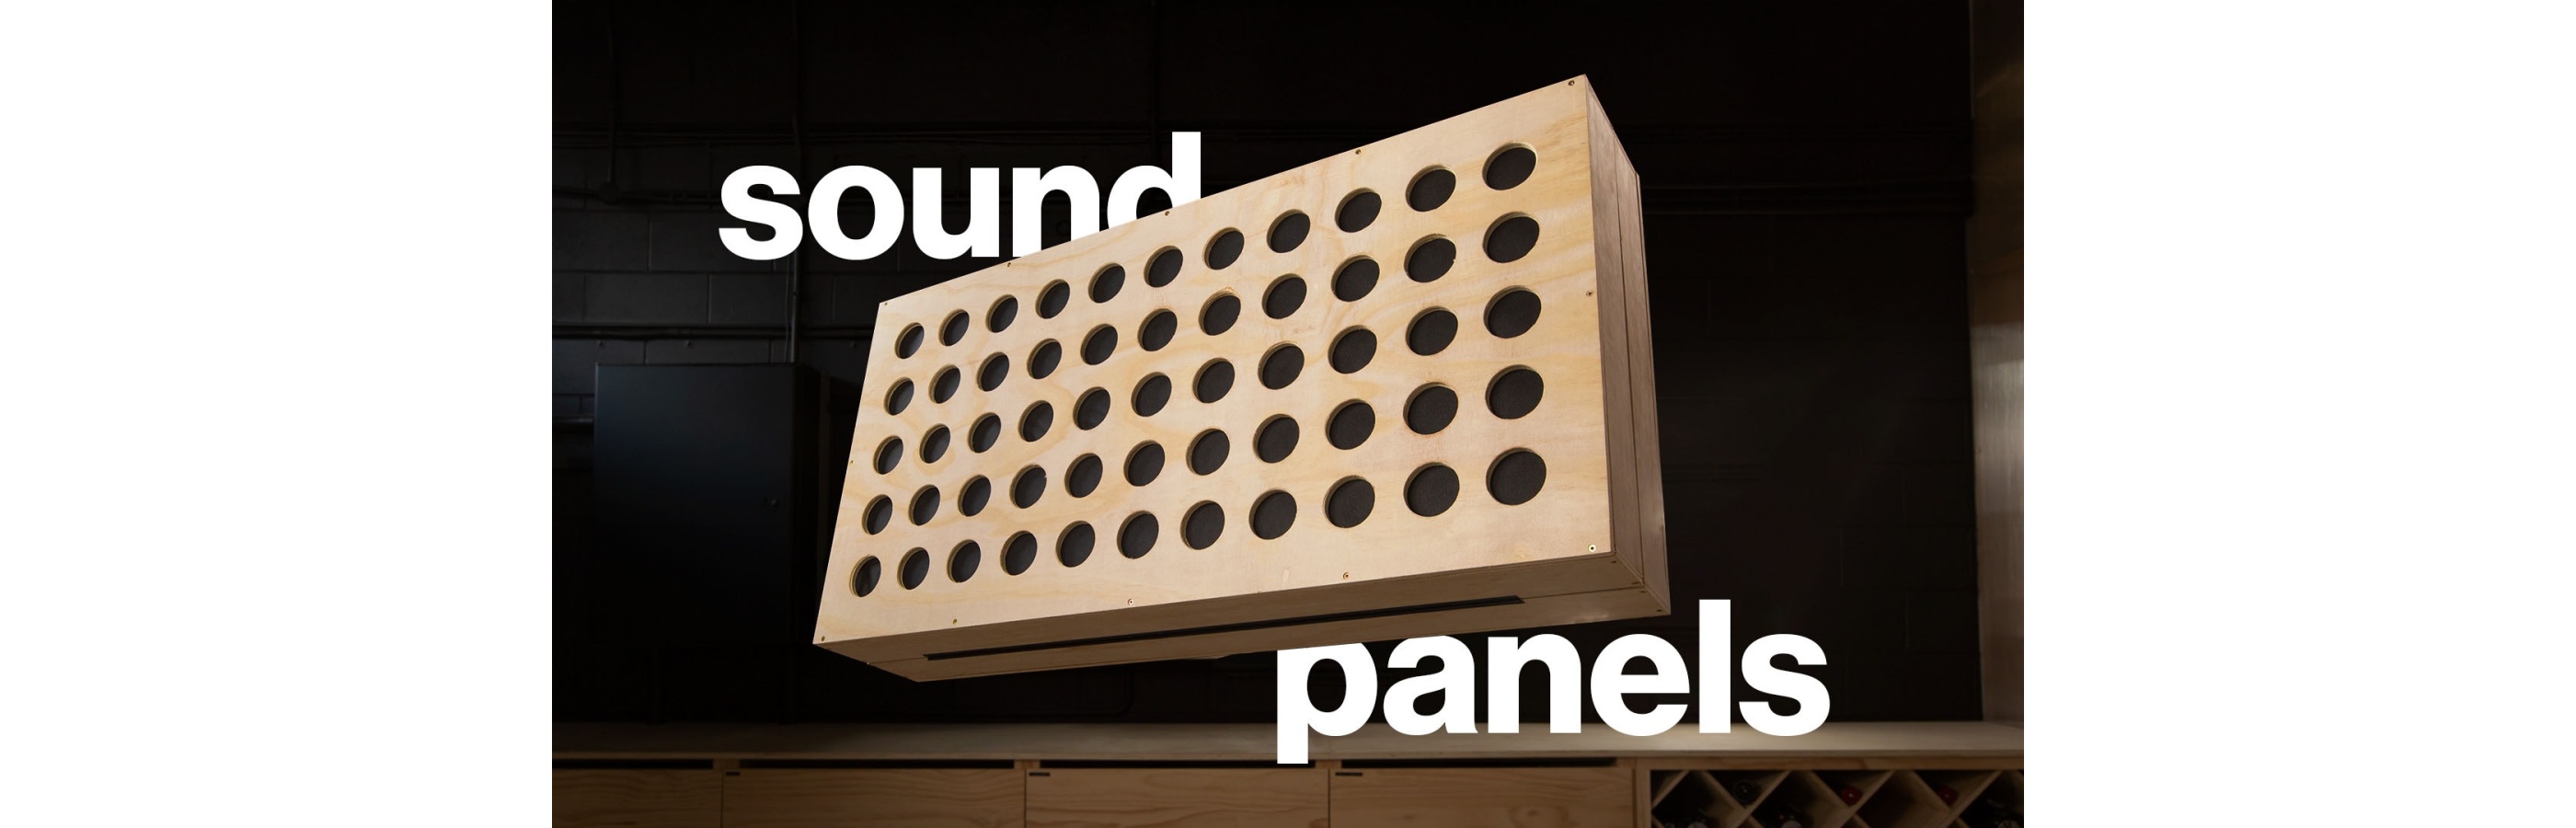 Can We Fix Our Audio? DIY Sound Absorption Panels